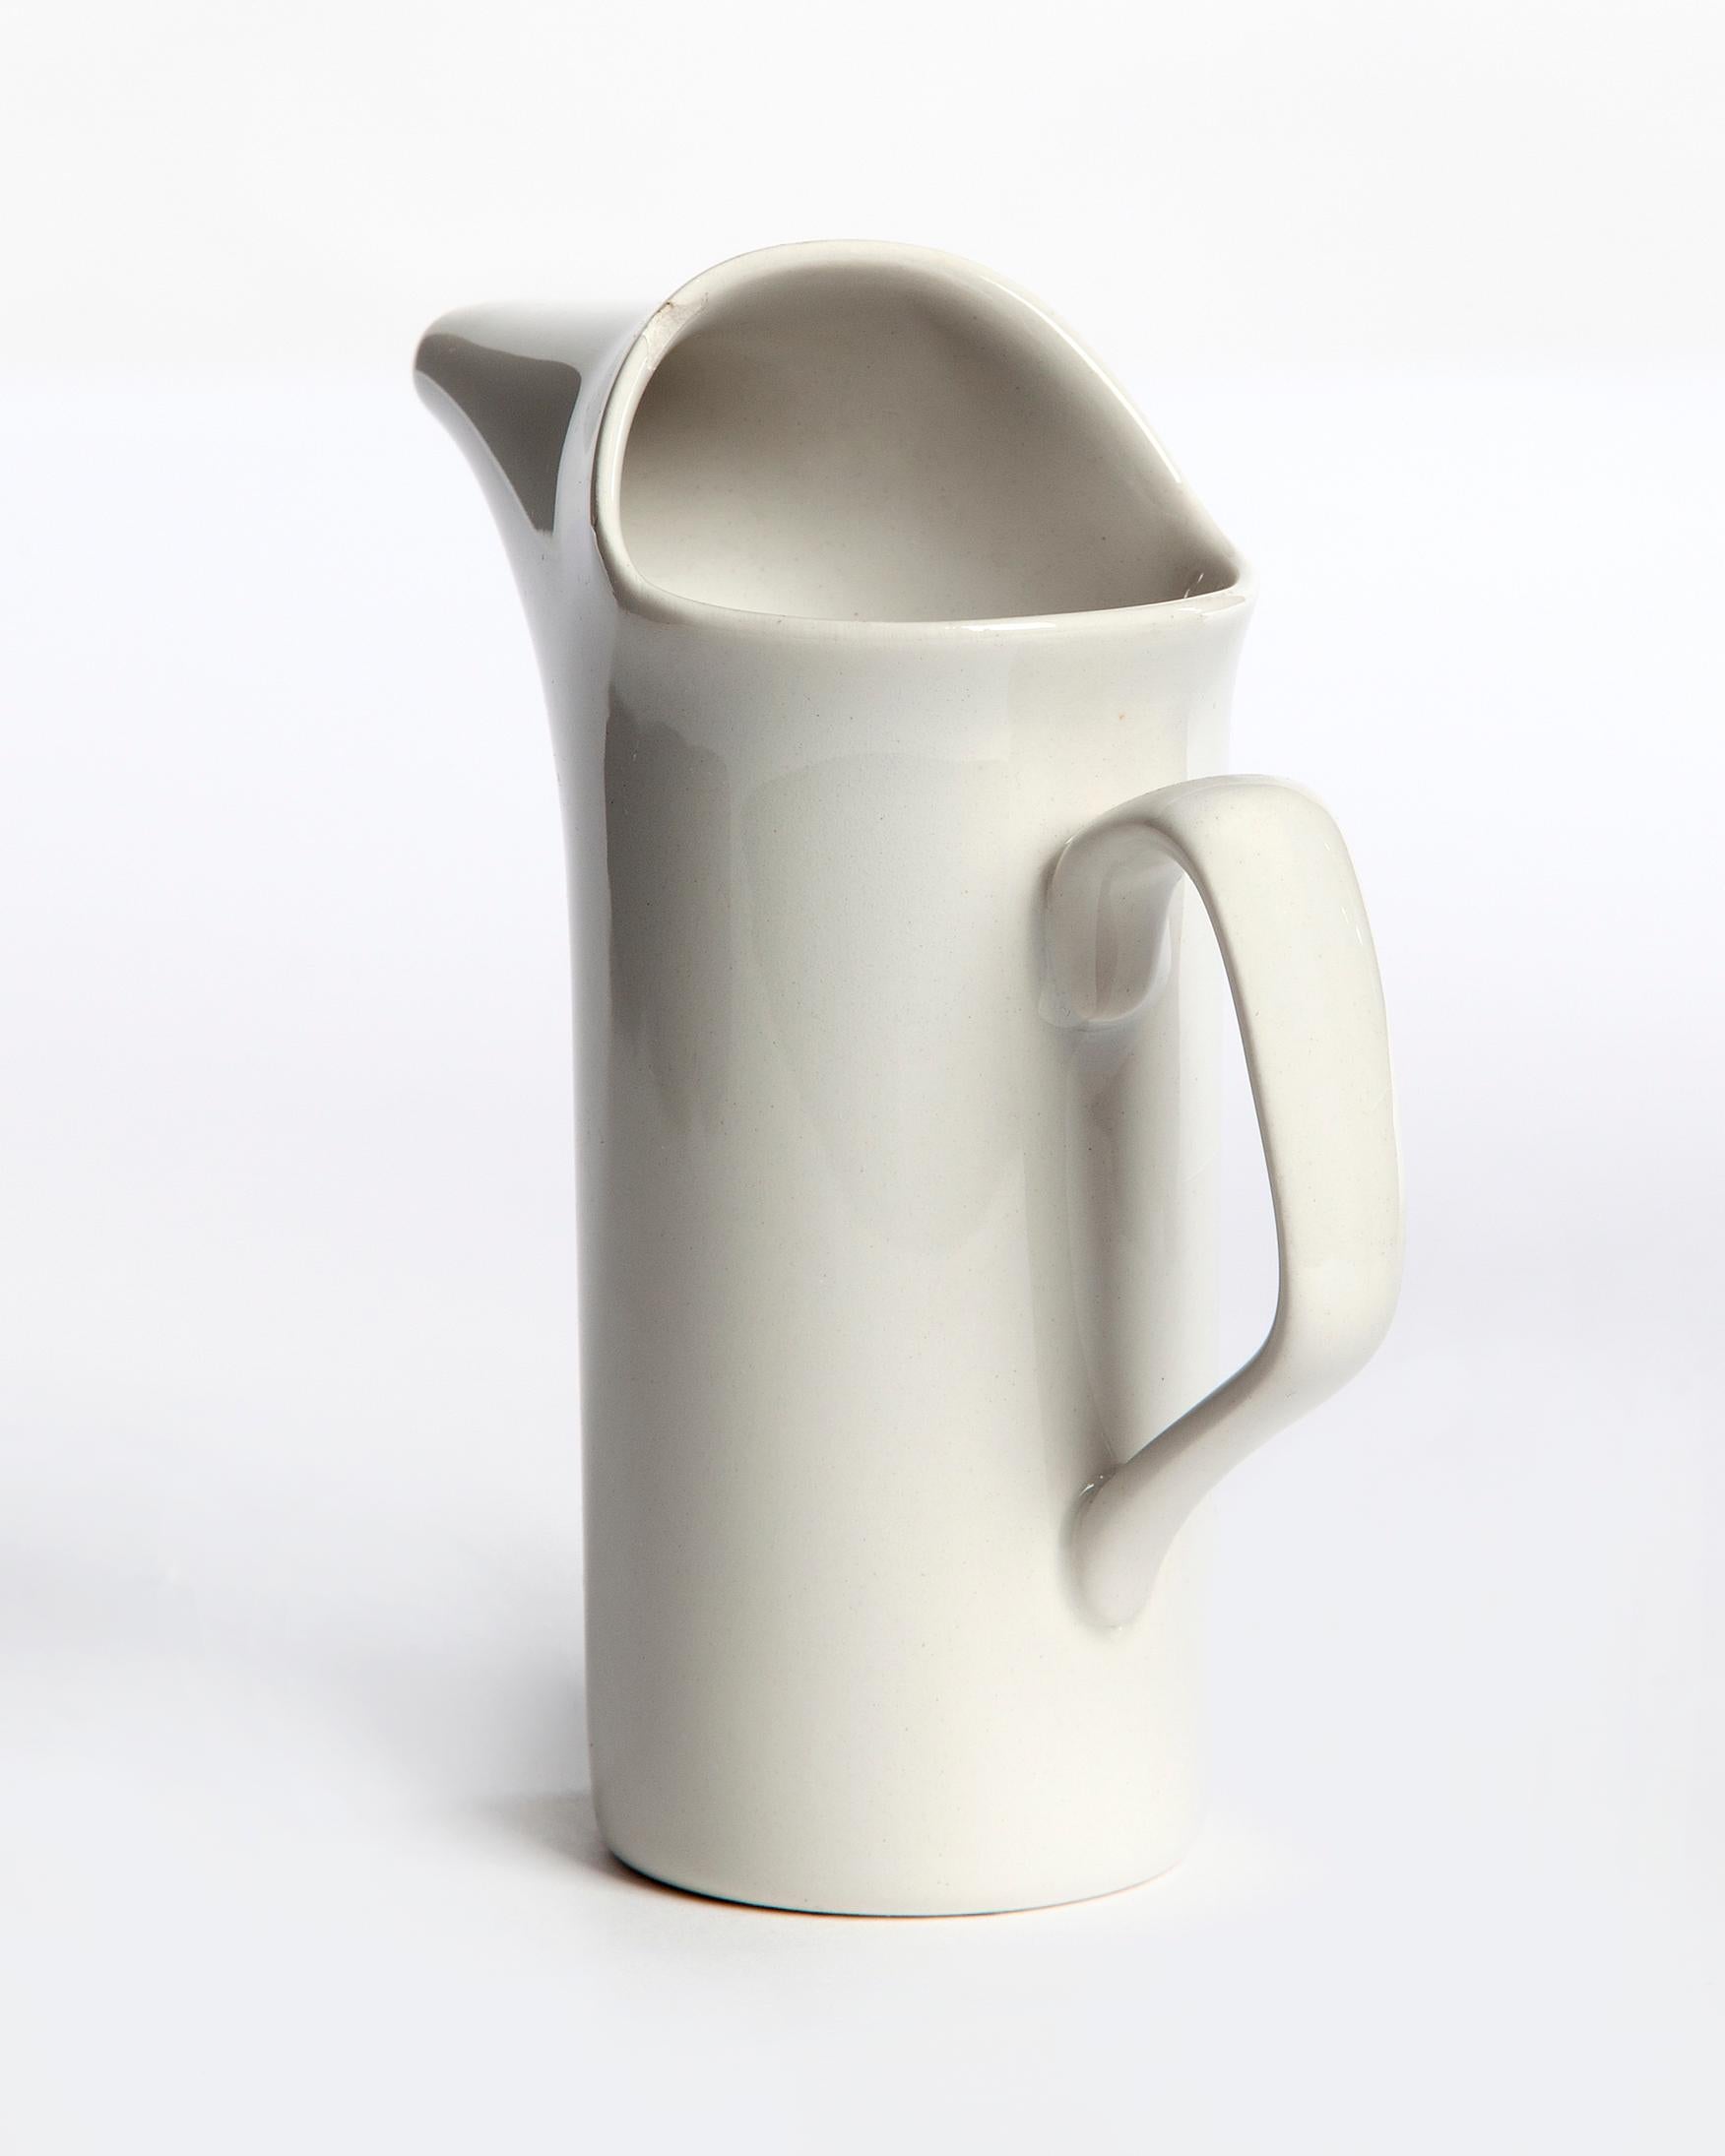 Small white pitcher from the 